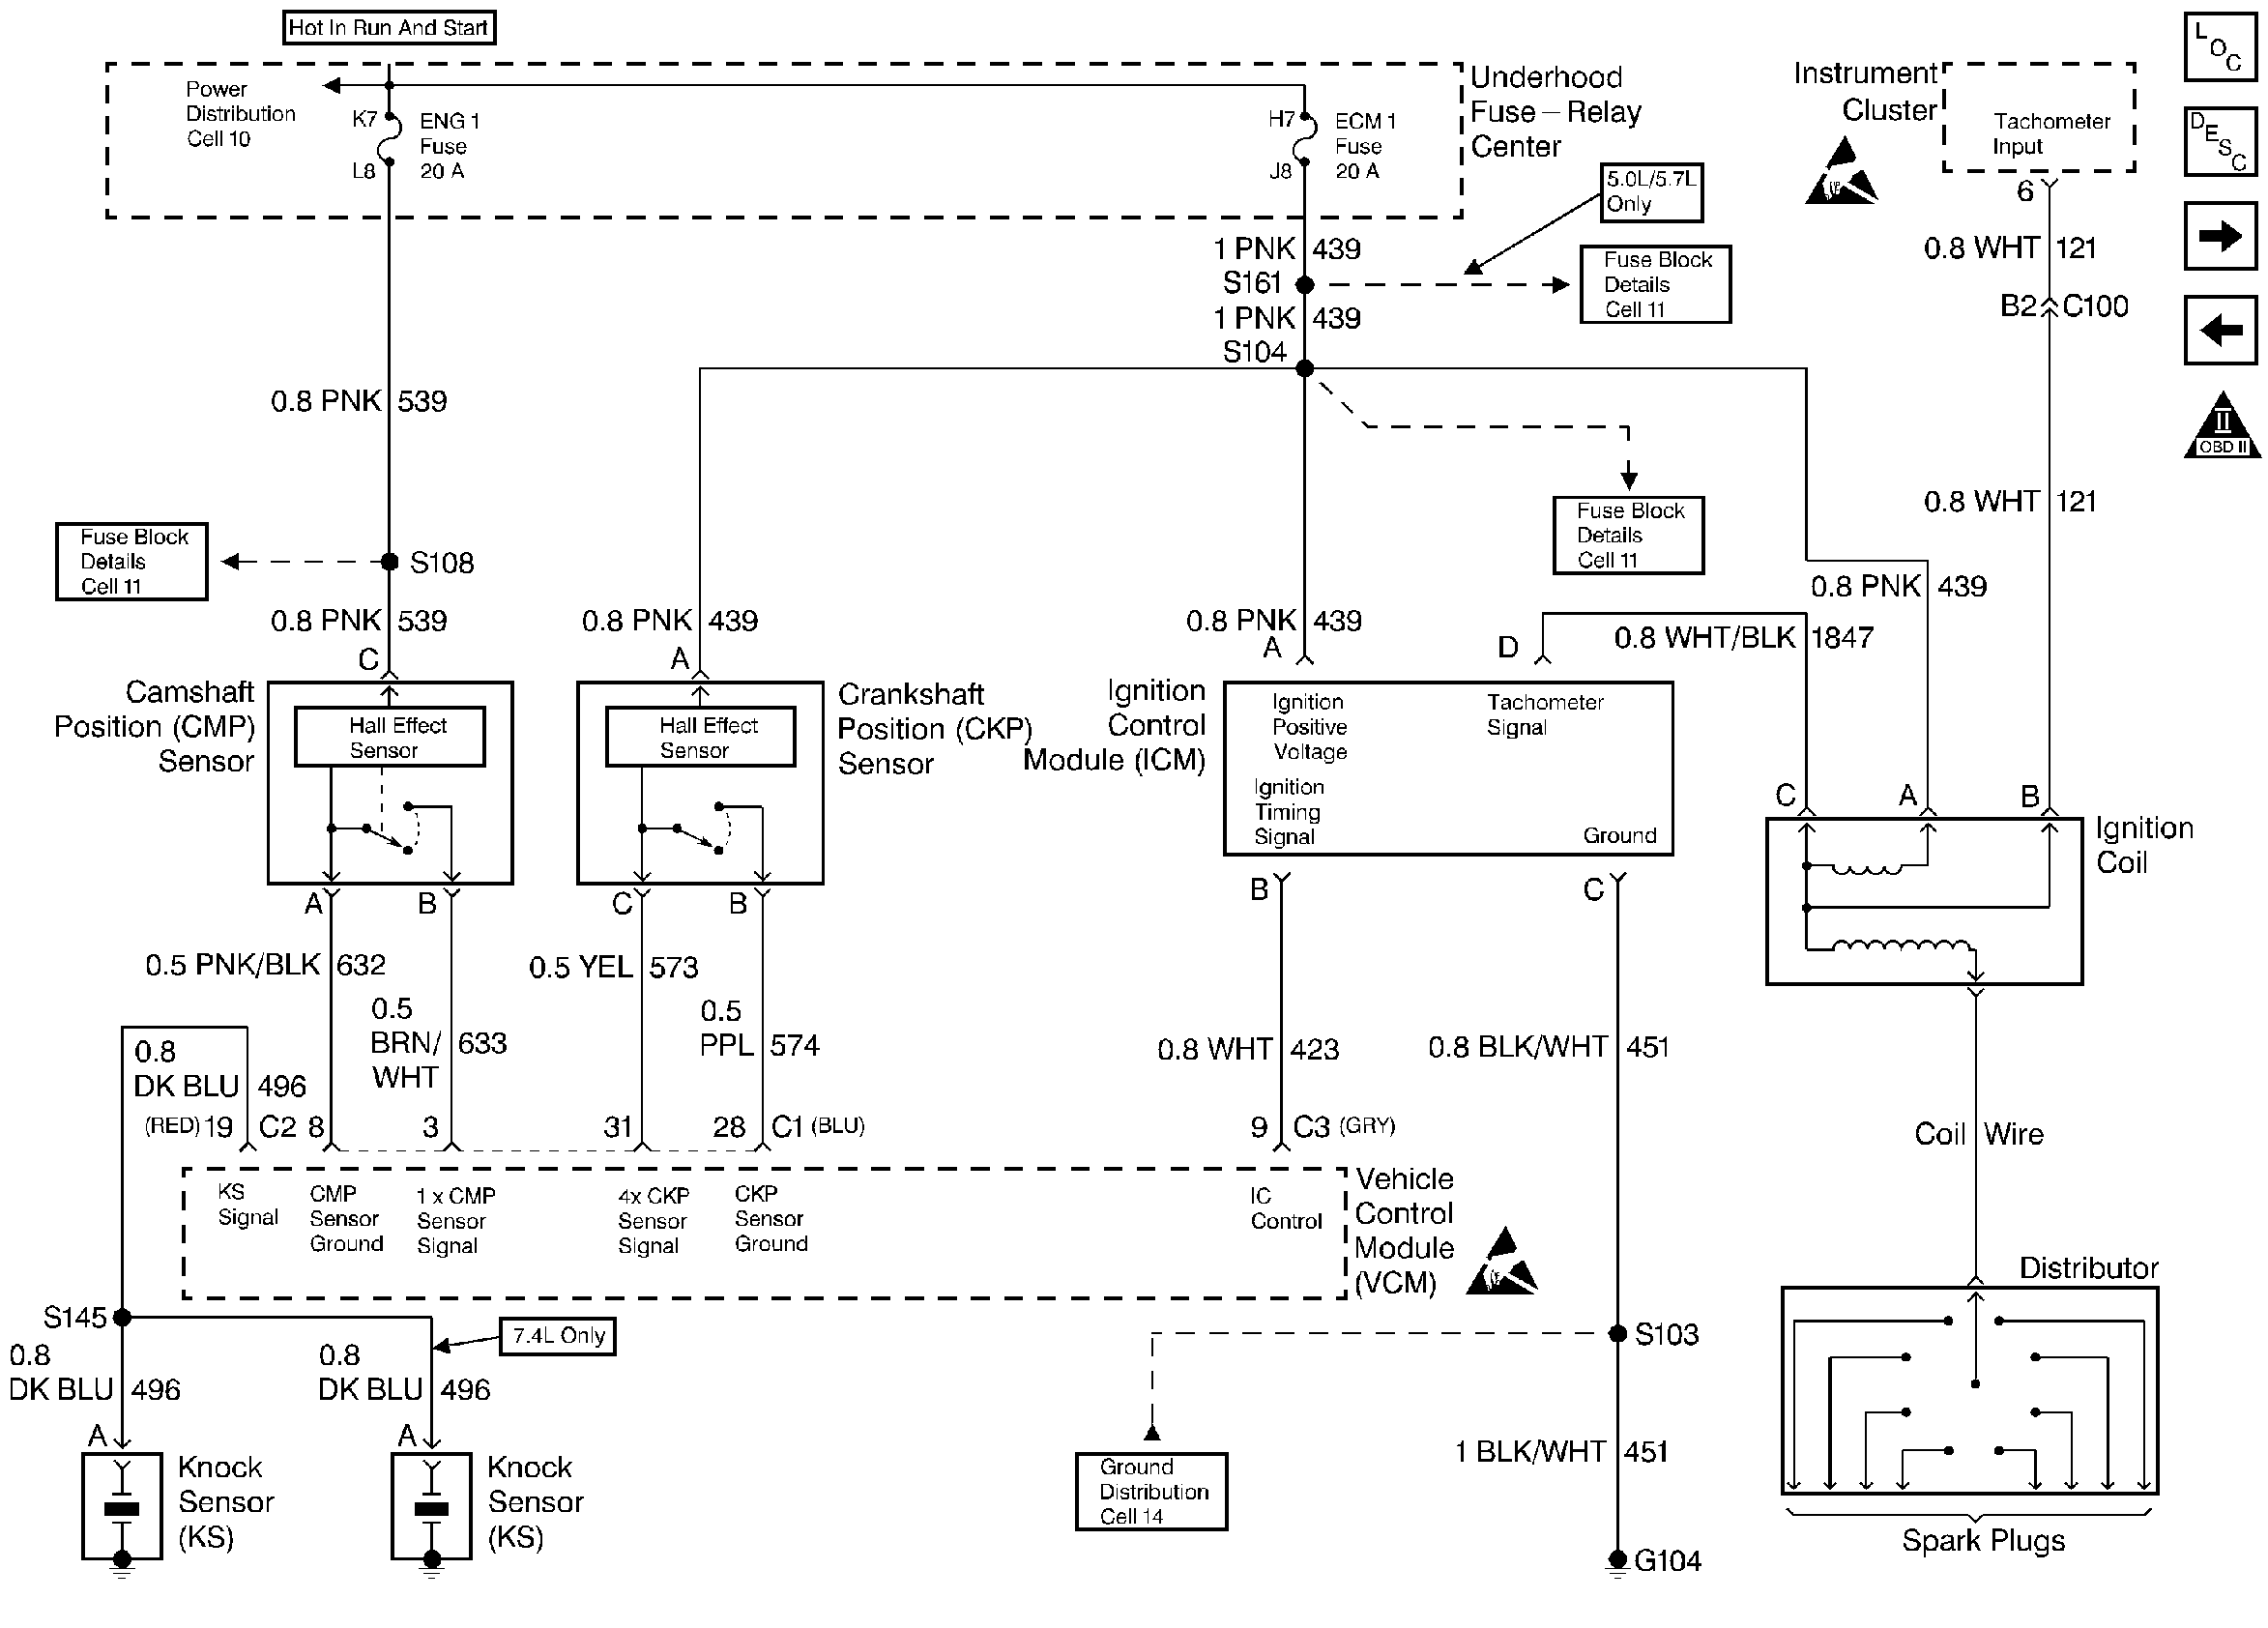 Wiring Diagram For A Chevy Starter Motor from wiringall.com